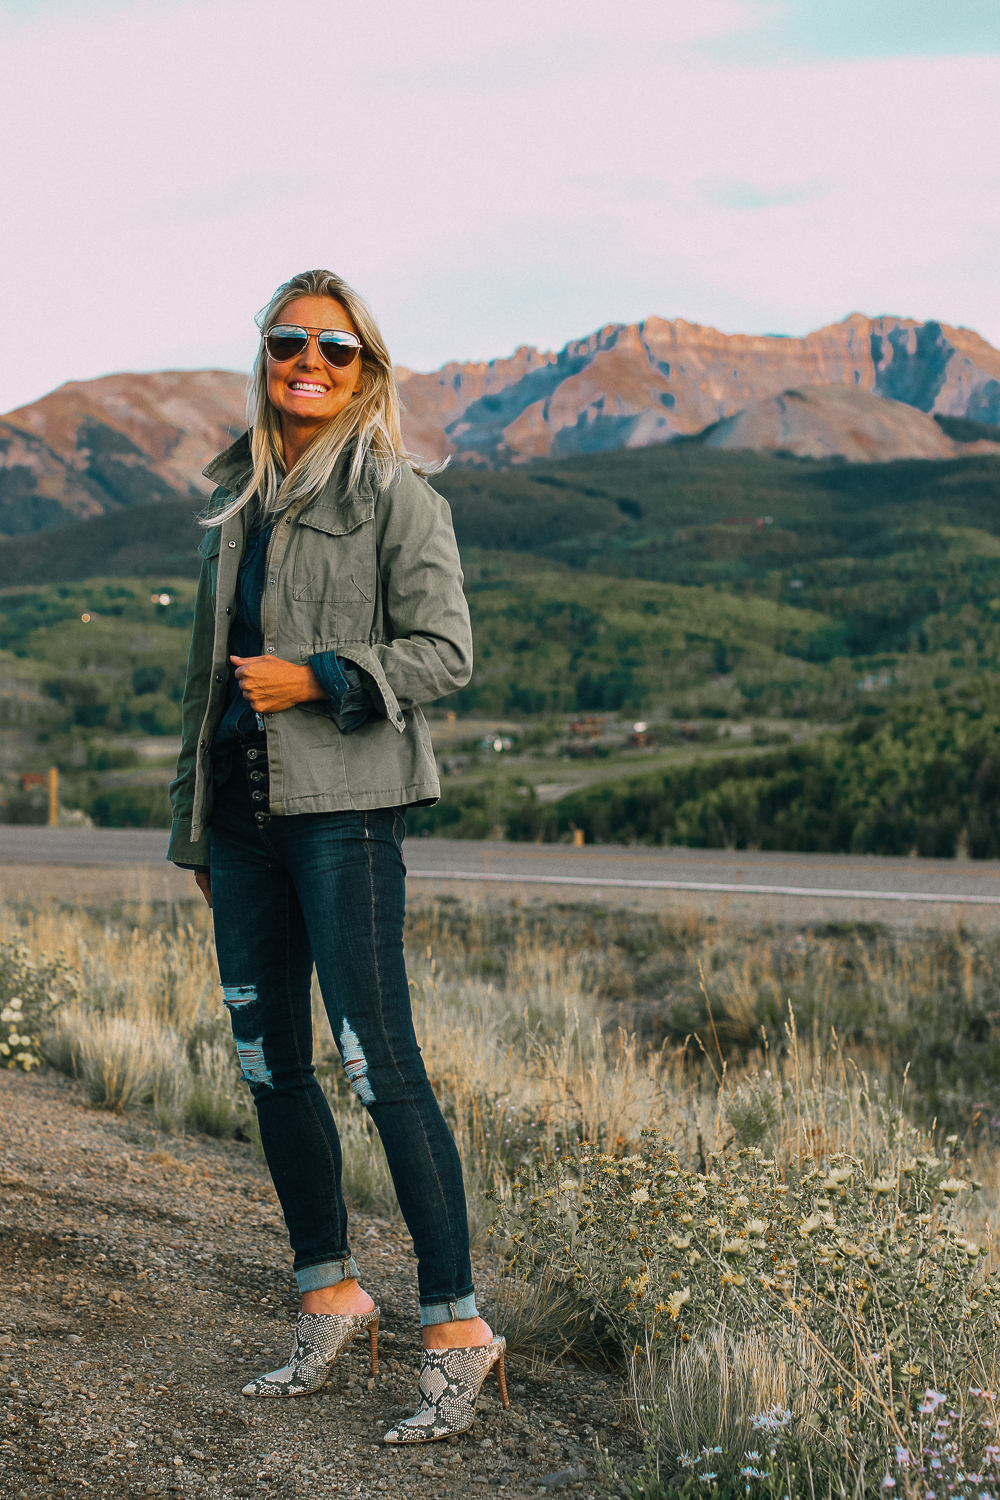 Affordable fall fashion from JCPenney's, including a military jacket in green over a chambray button down shirt, paired with distressed blue jeans, python mules and aviator sunglasses on fashion blogger Erin Busbee of BusbeeStyle.com, one of five shoes you need this fall